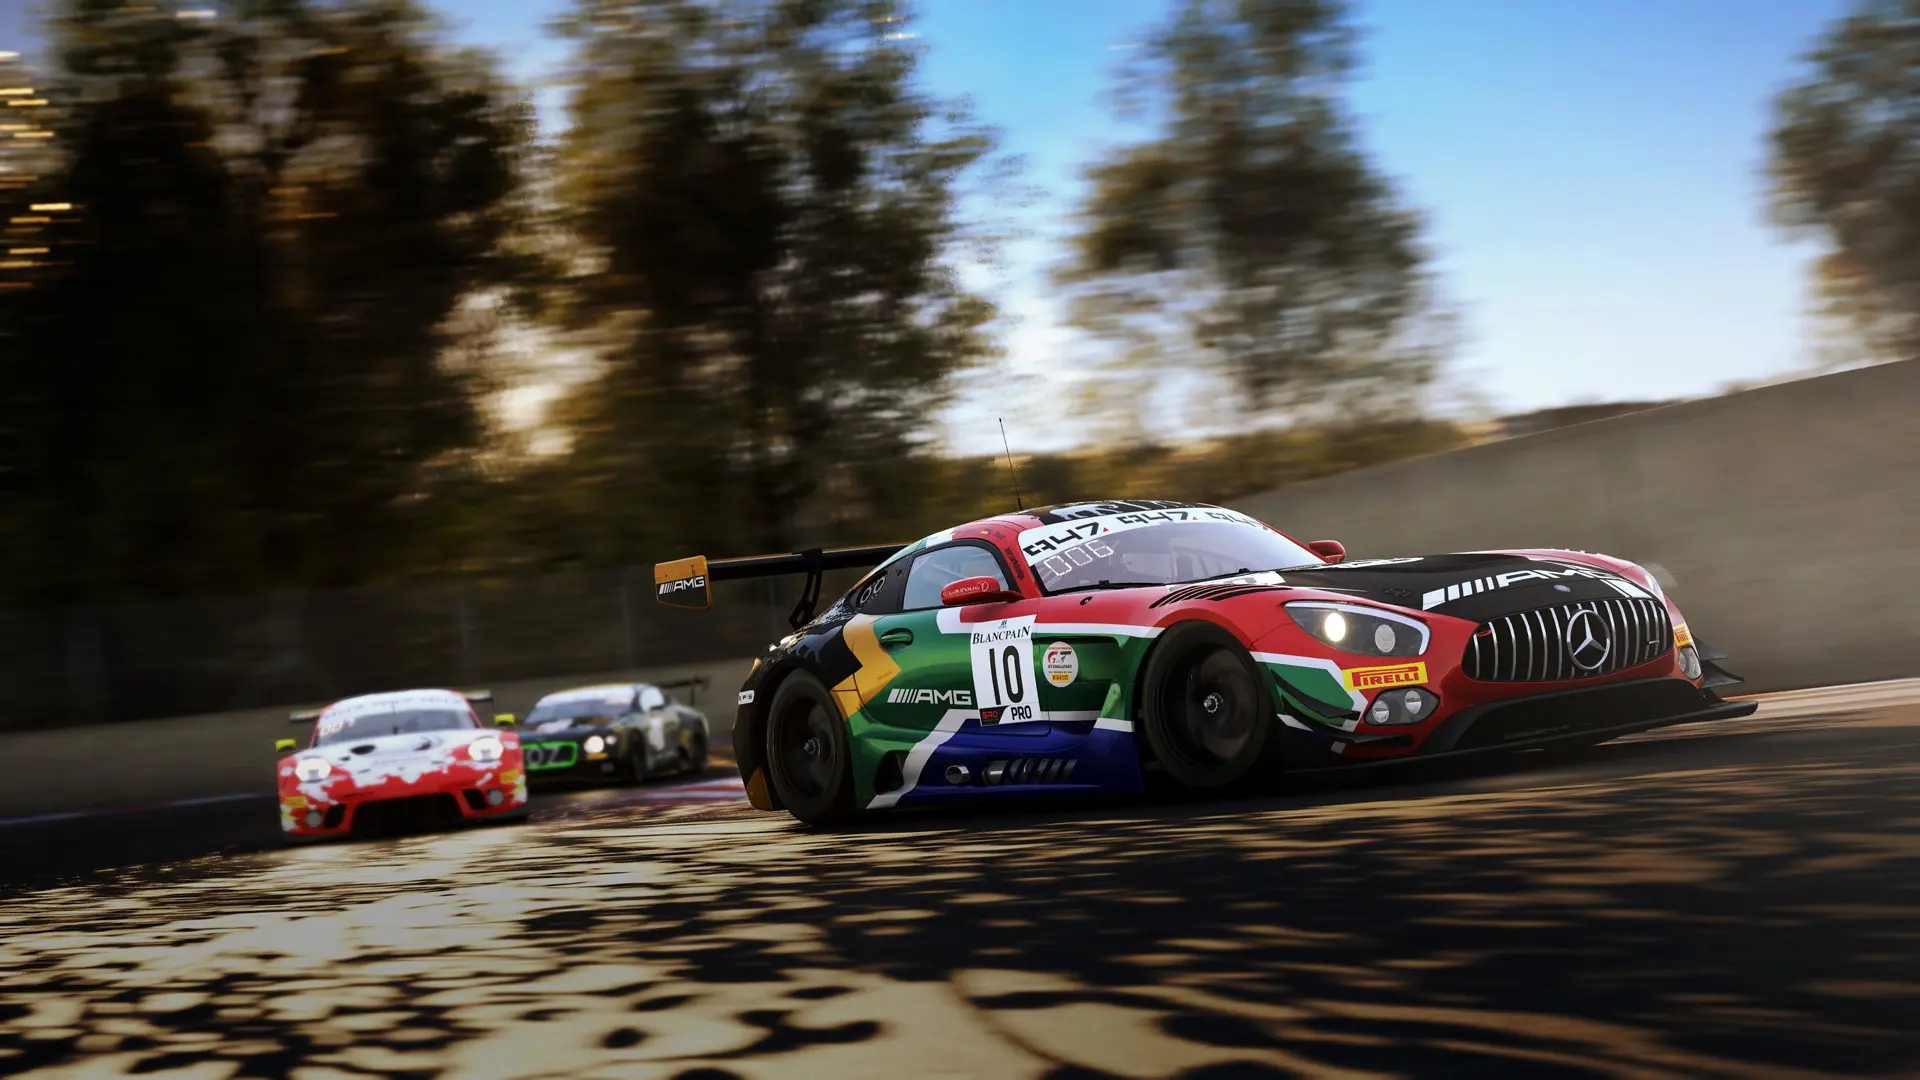 The Intercontinental GT Pack